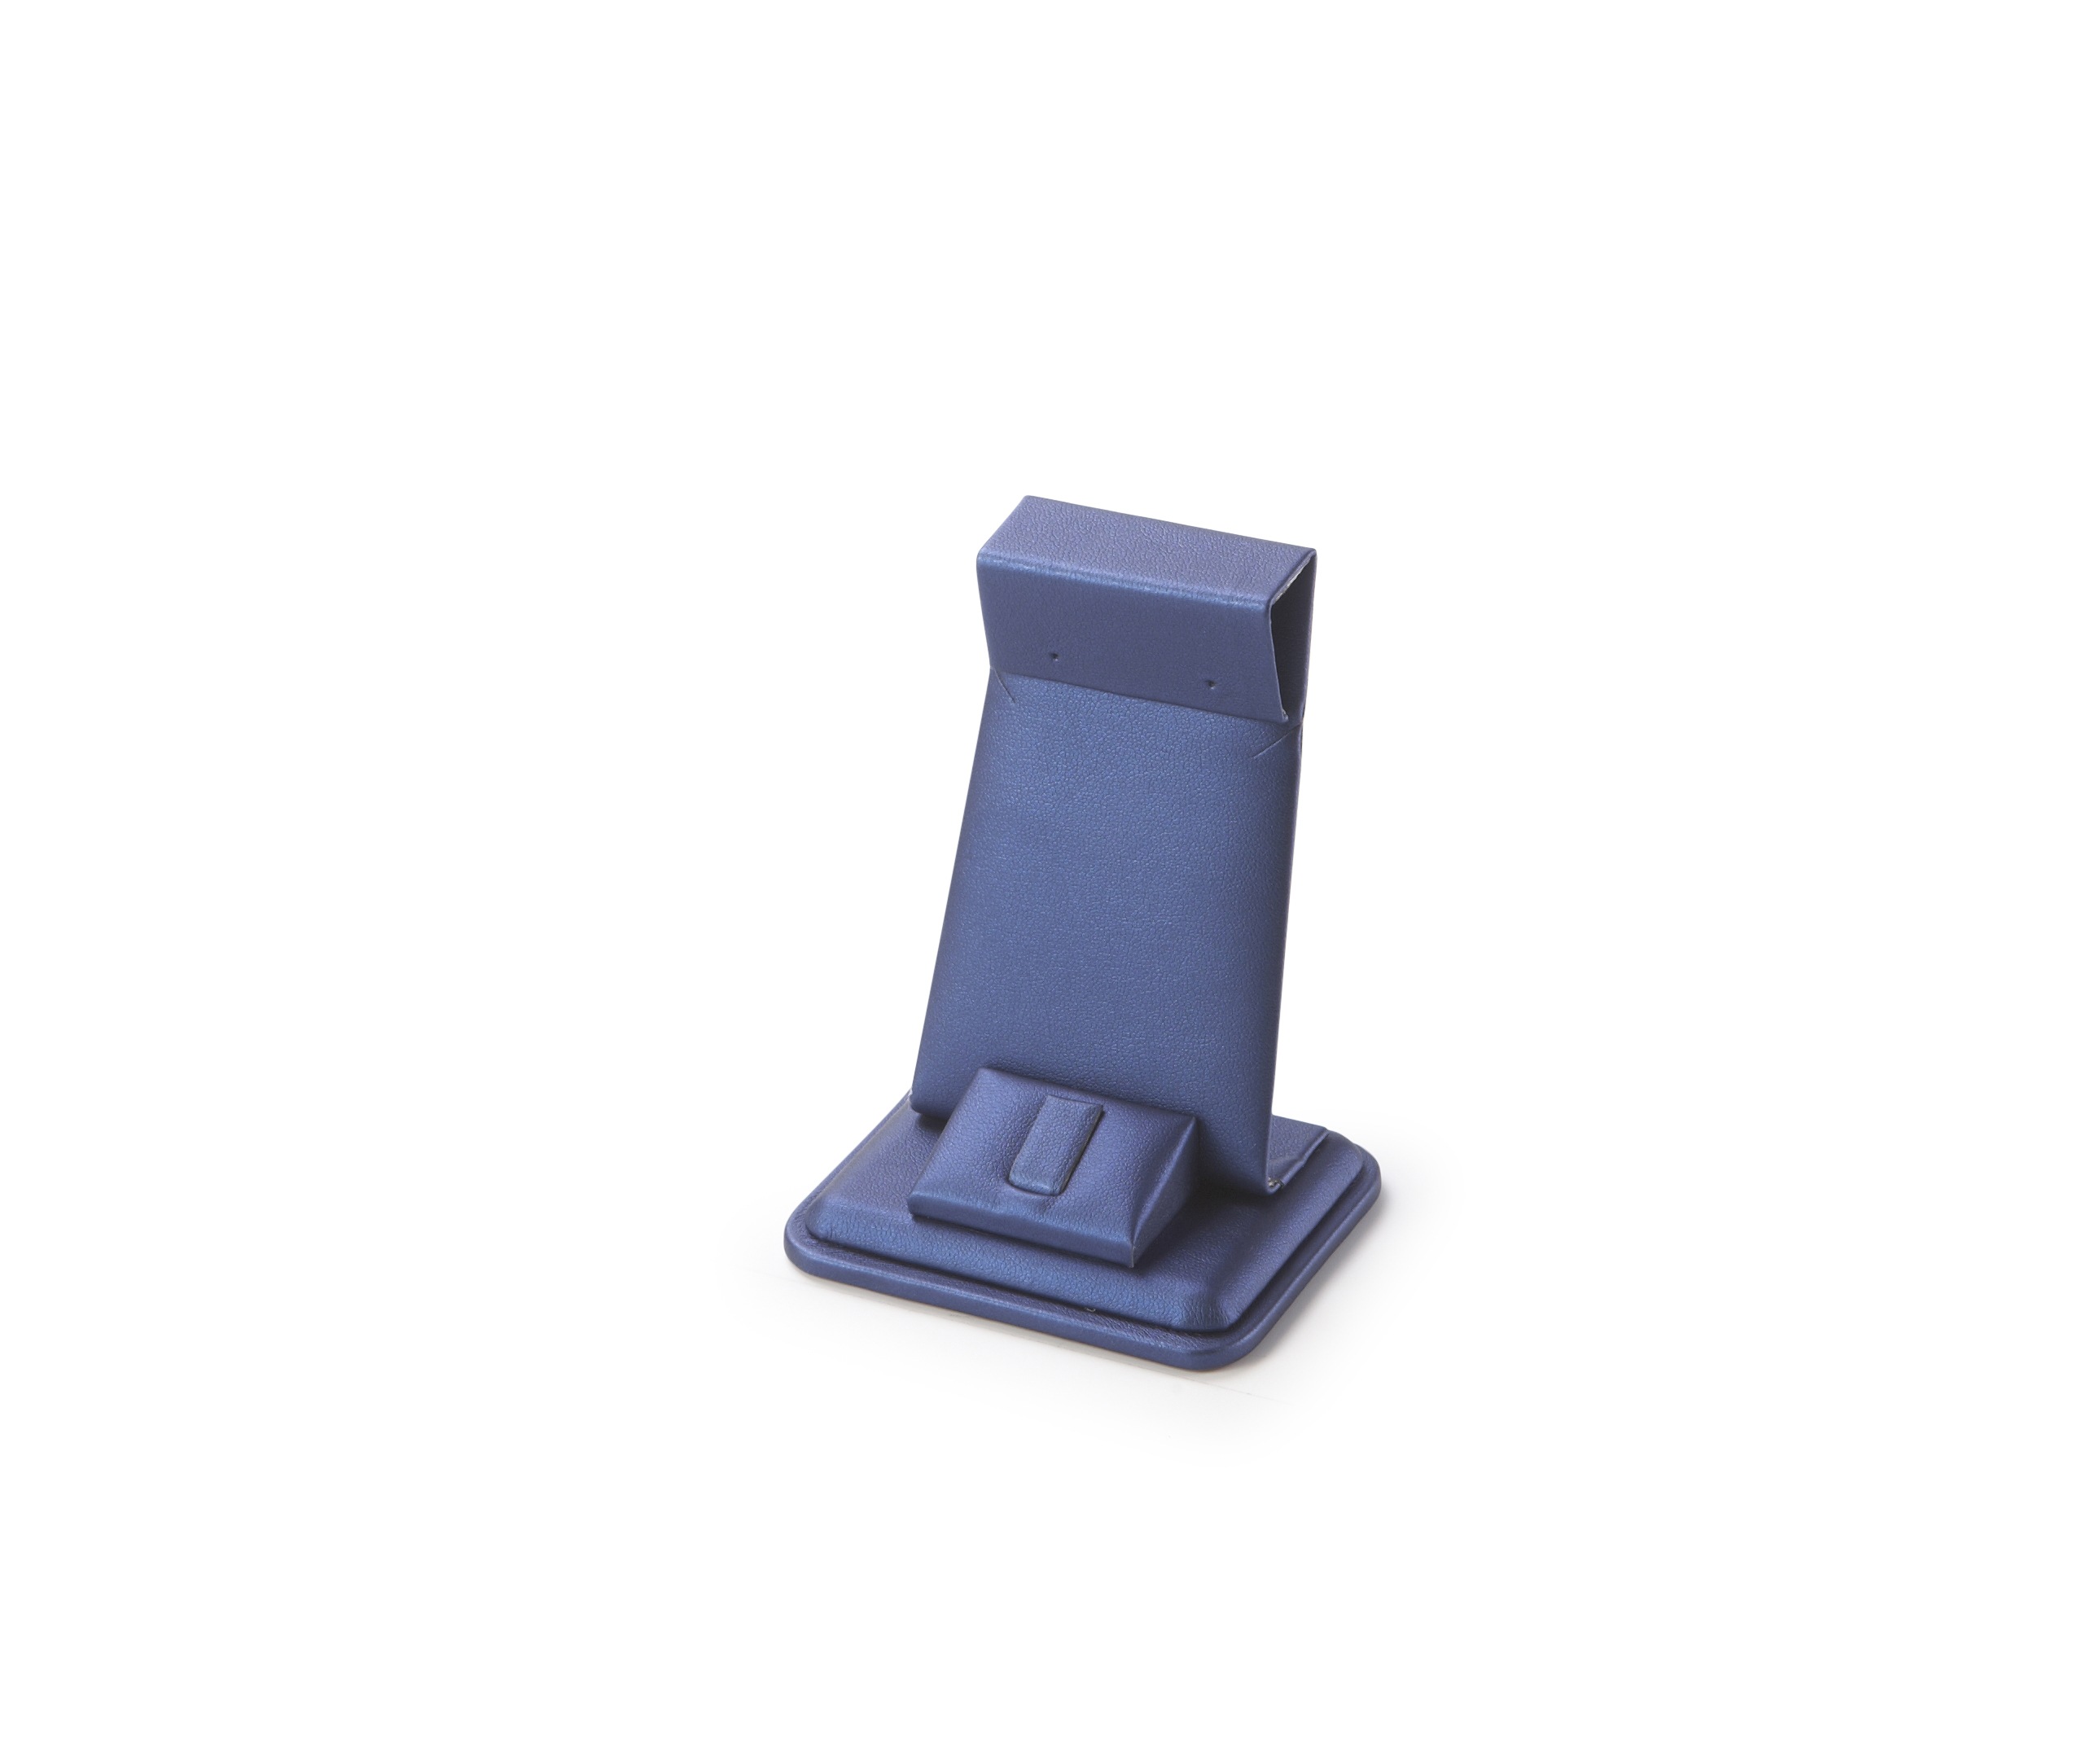 Navy Blue Leatherette Earring/Ring Stand